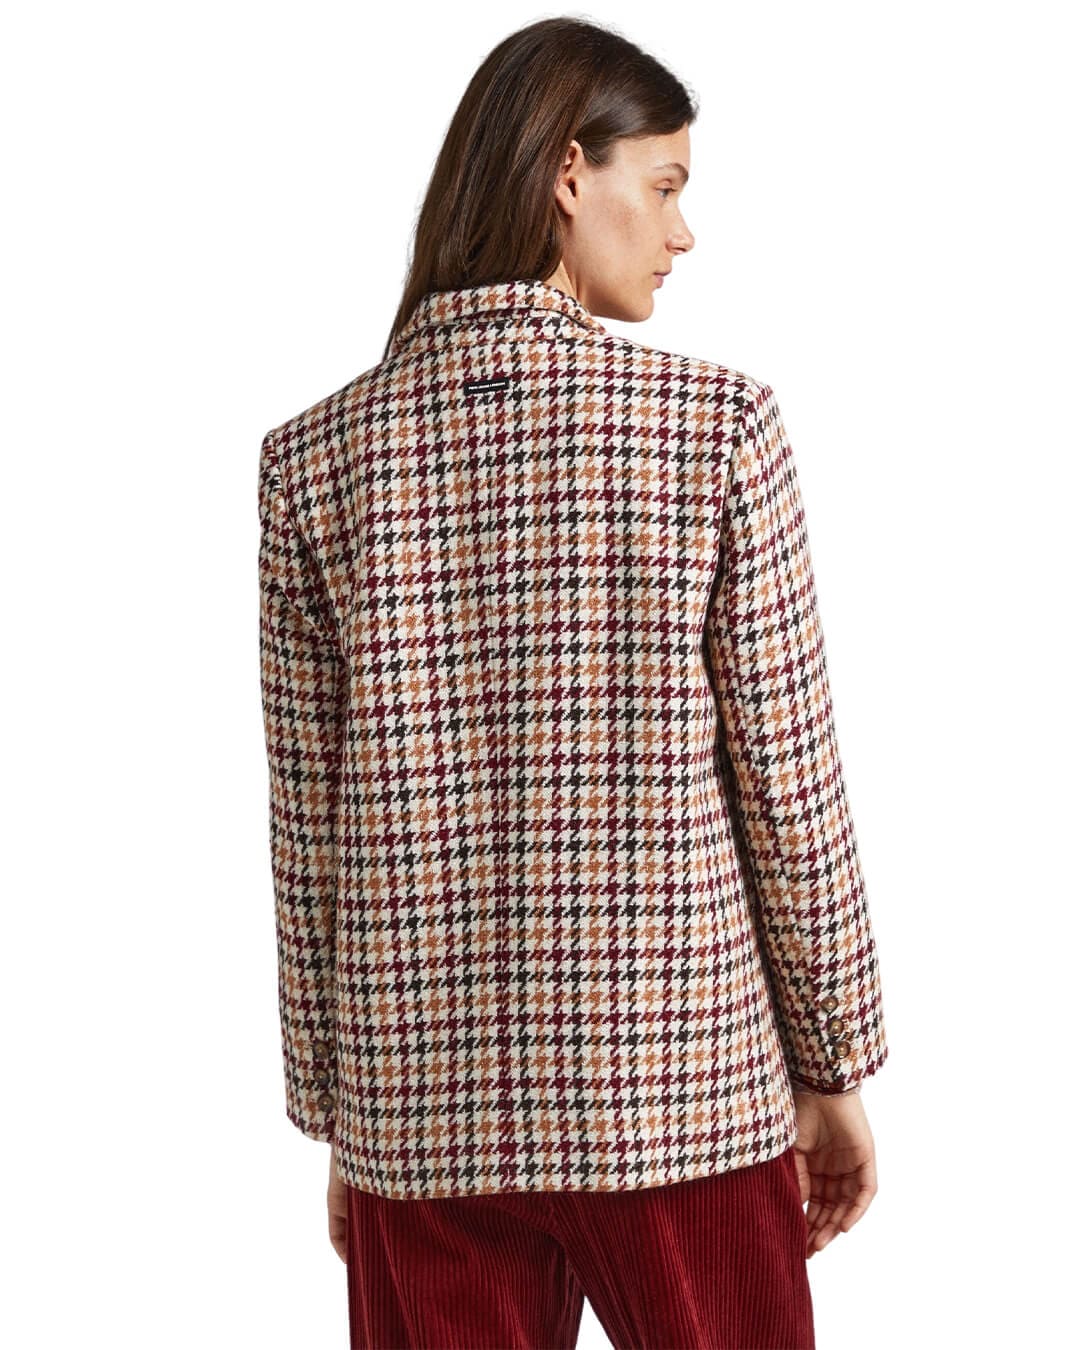 Pepe Jeans Outerwear Pepe Jeans Romina Multicoloured Checked Jacket